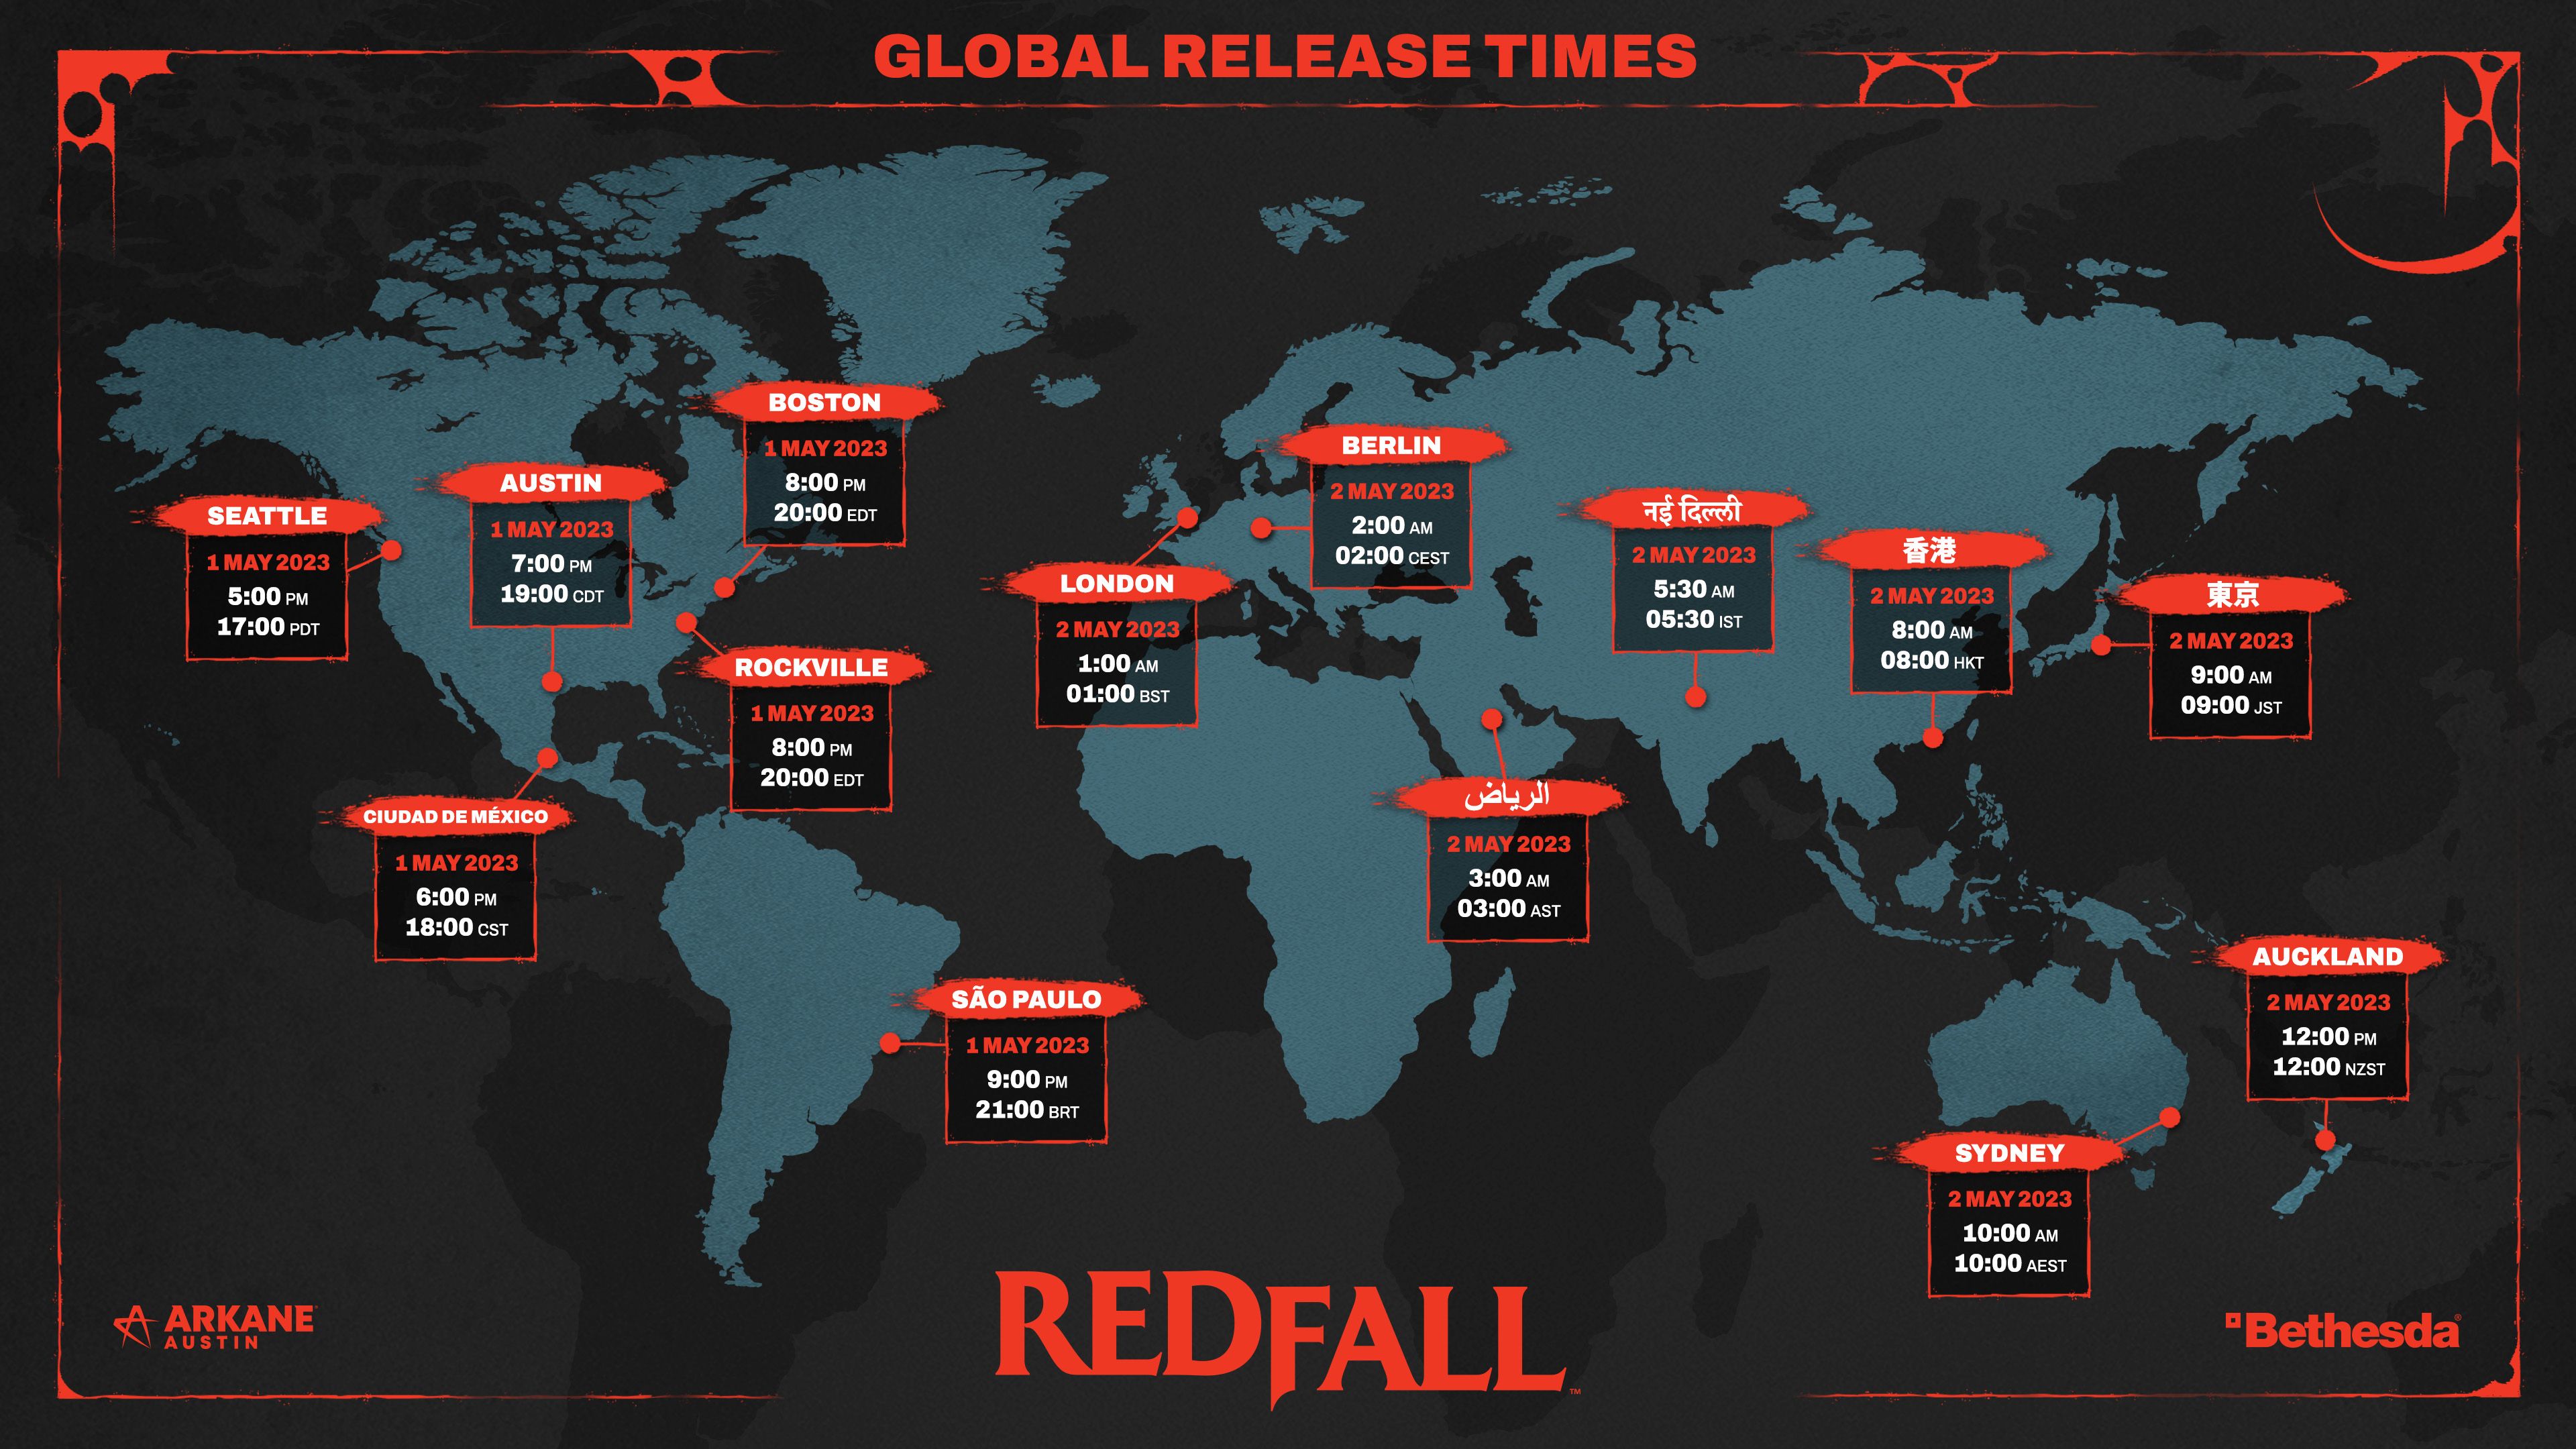 At last, Xbox Series X co-op game Redfall has a release date